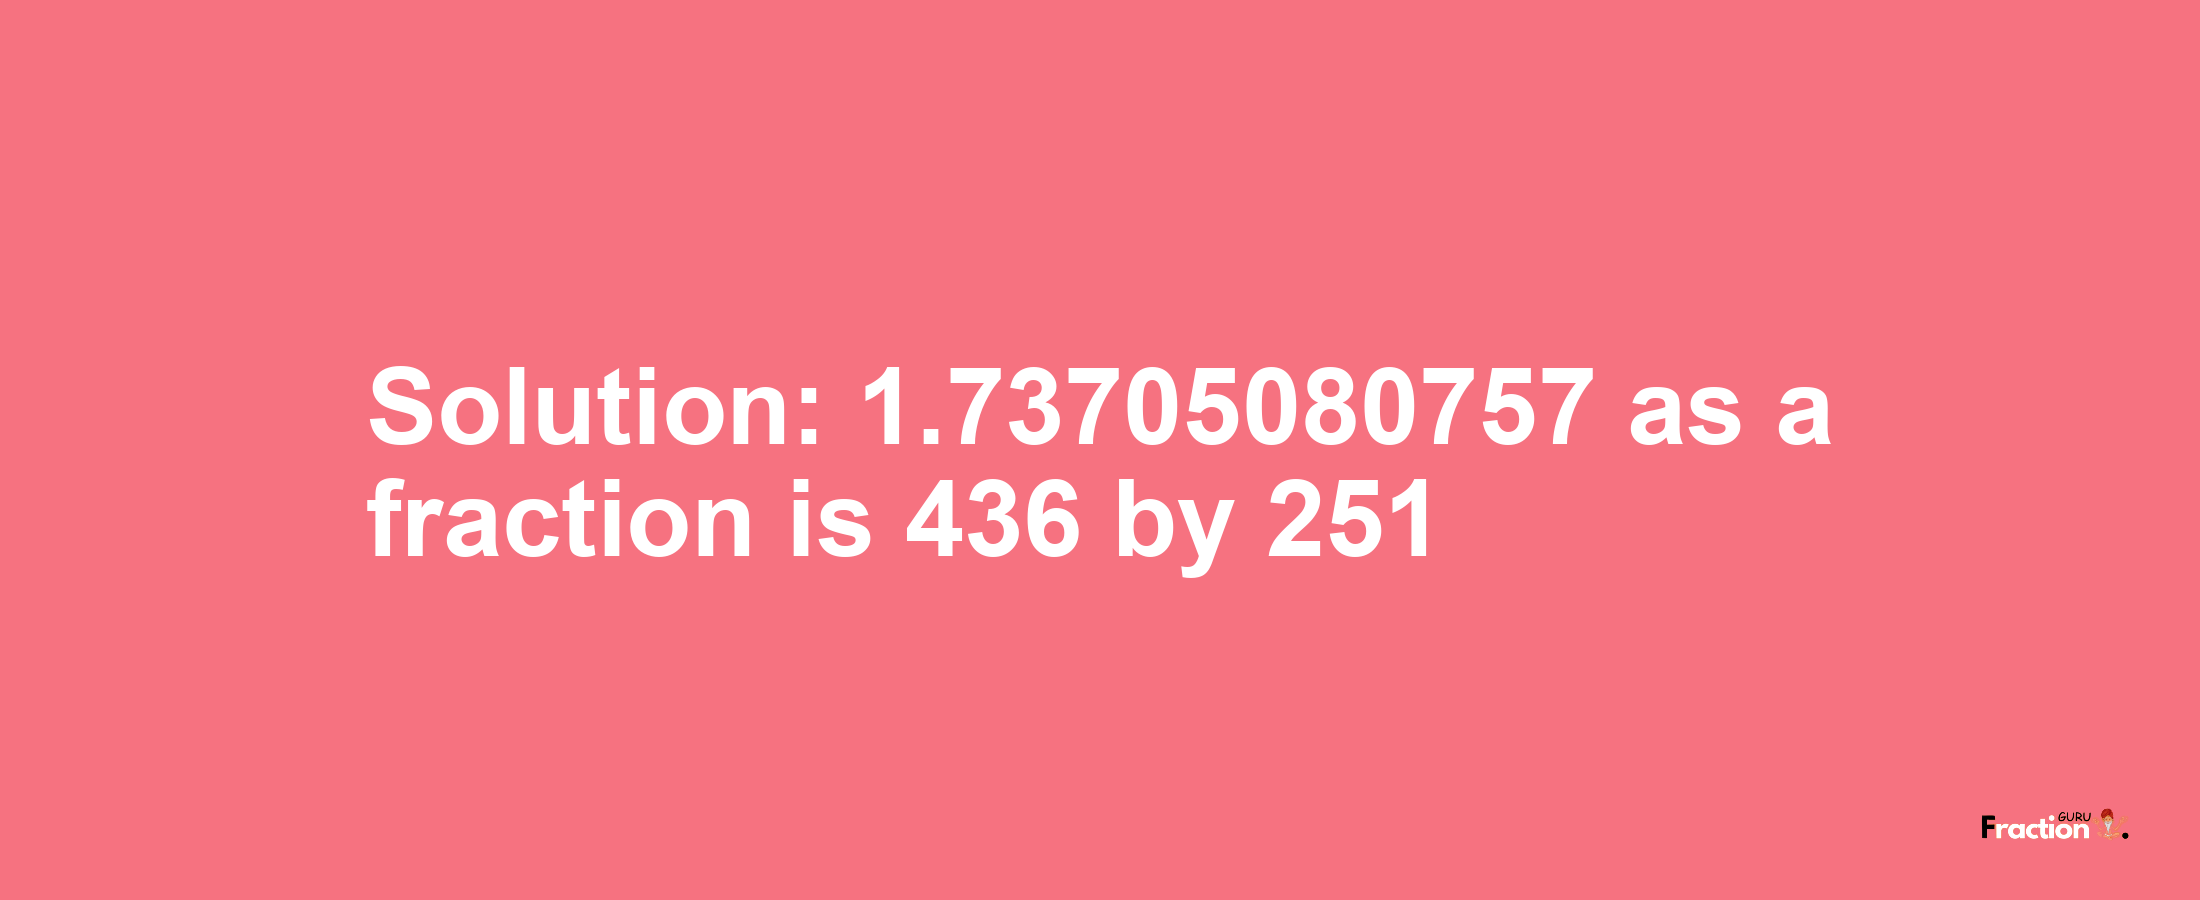 Solution:1.73705080757 as a fraction is 436/251